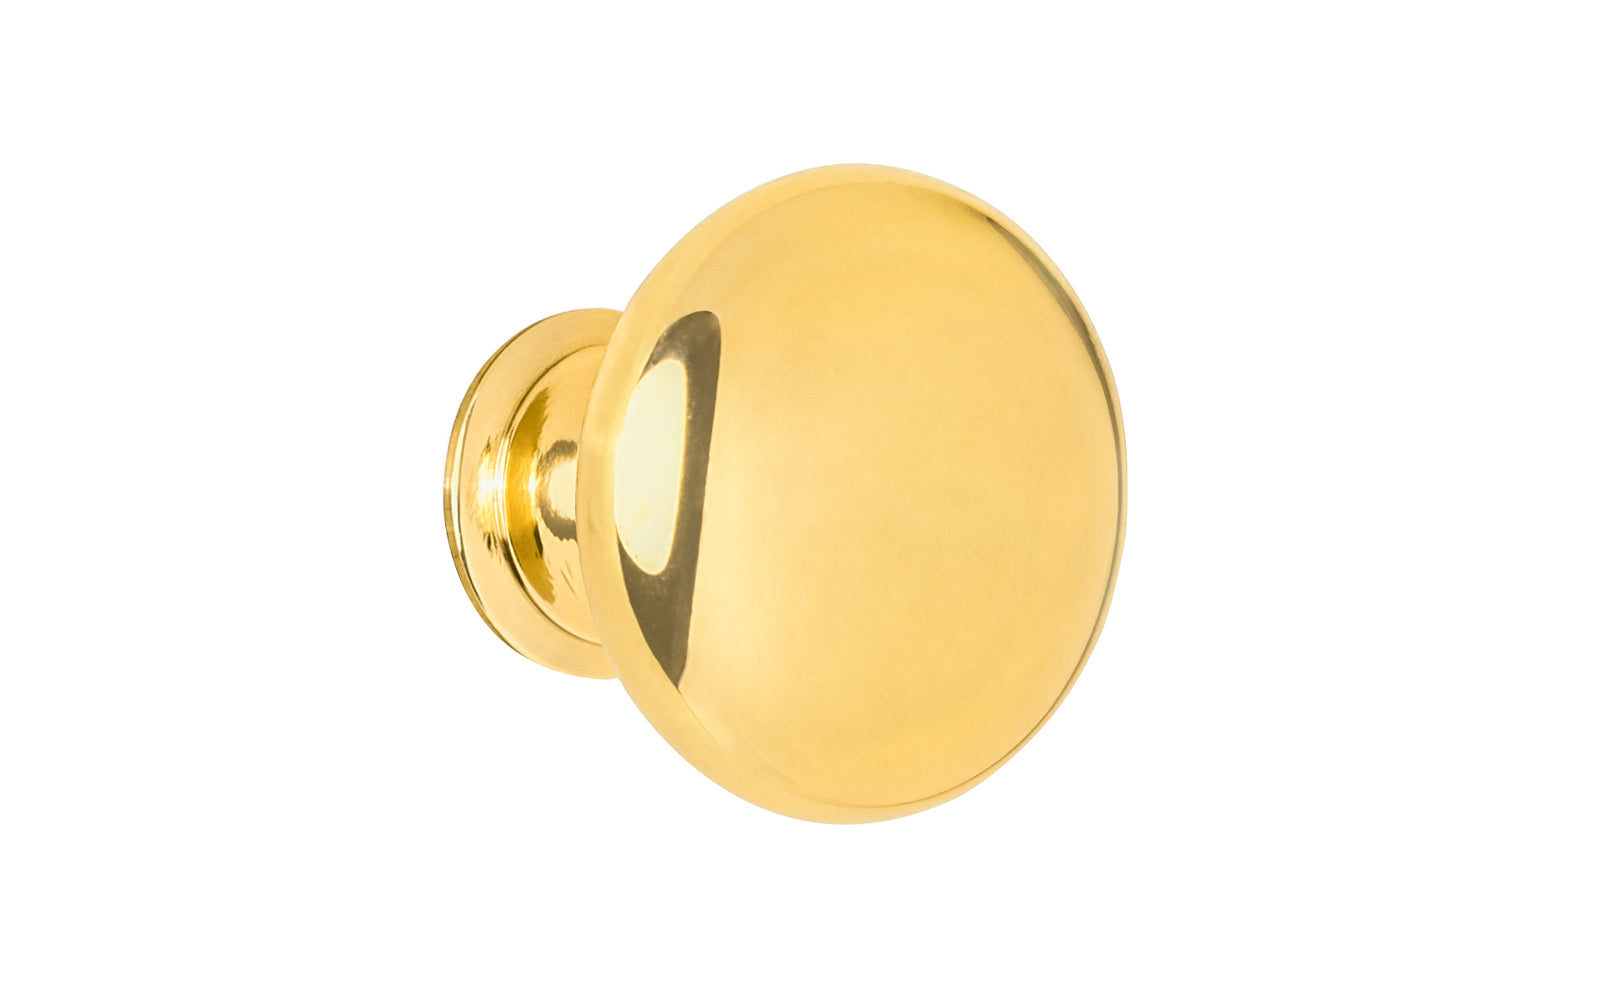 Vintage-style Hardware · Traditional & Classic Unlacquered Brass Knob. 1-1/4" diameter size knob. This stylish round cabinet knob has a smooth look & feel on a pedestal shaped base. Great for kitchens, bathrooms, furniture, cabinets, drawers. Non-lacquered brass (un-lacquered brass will patina). Authentic reproduction hardware.